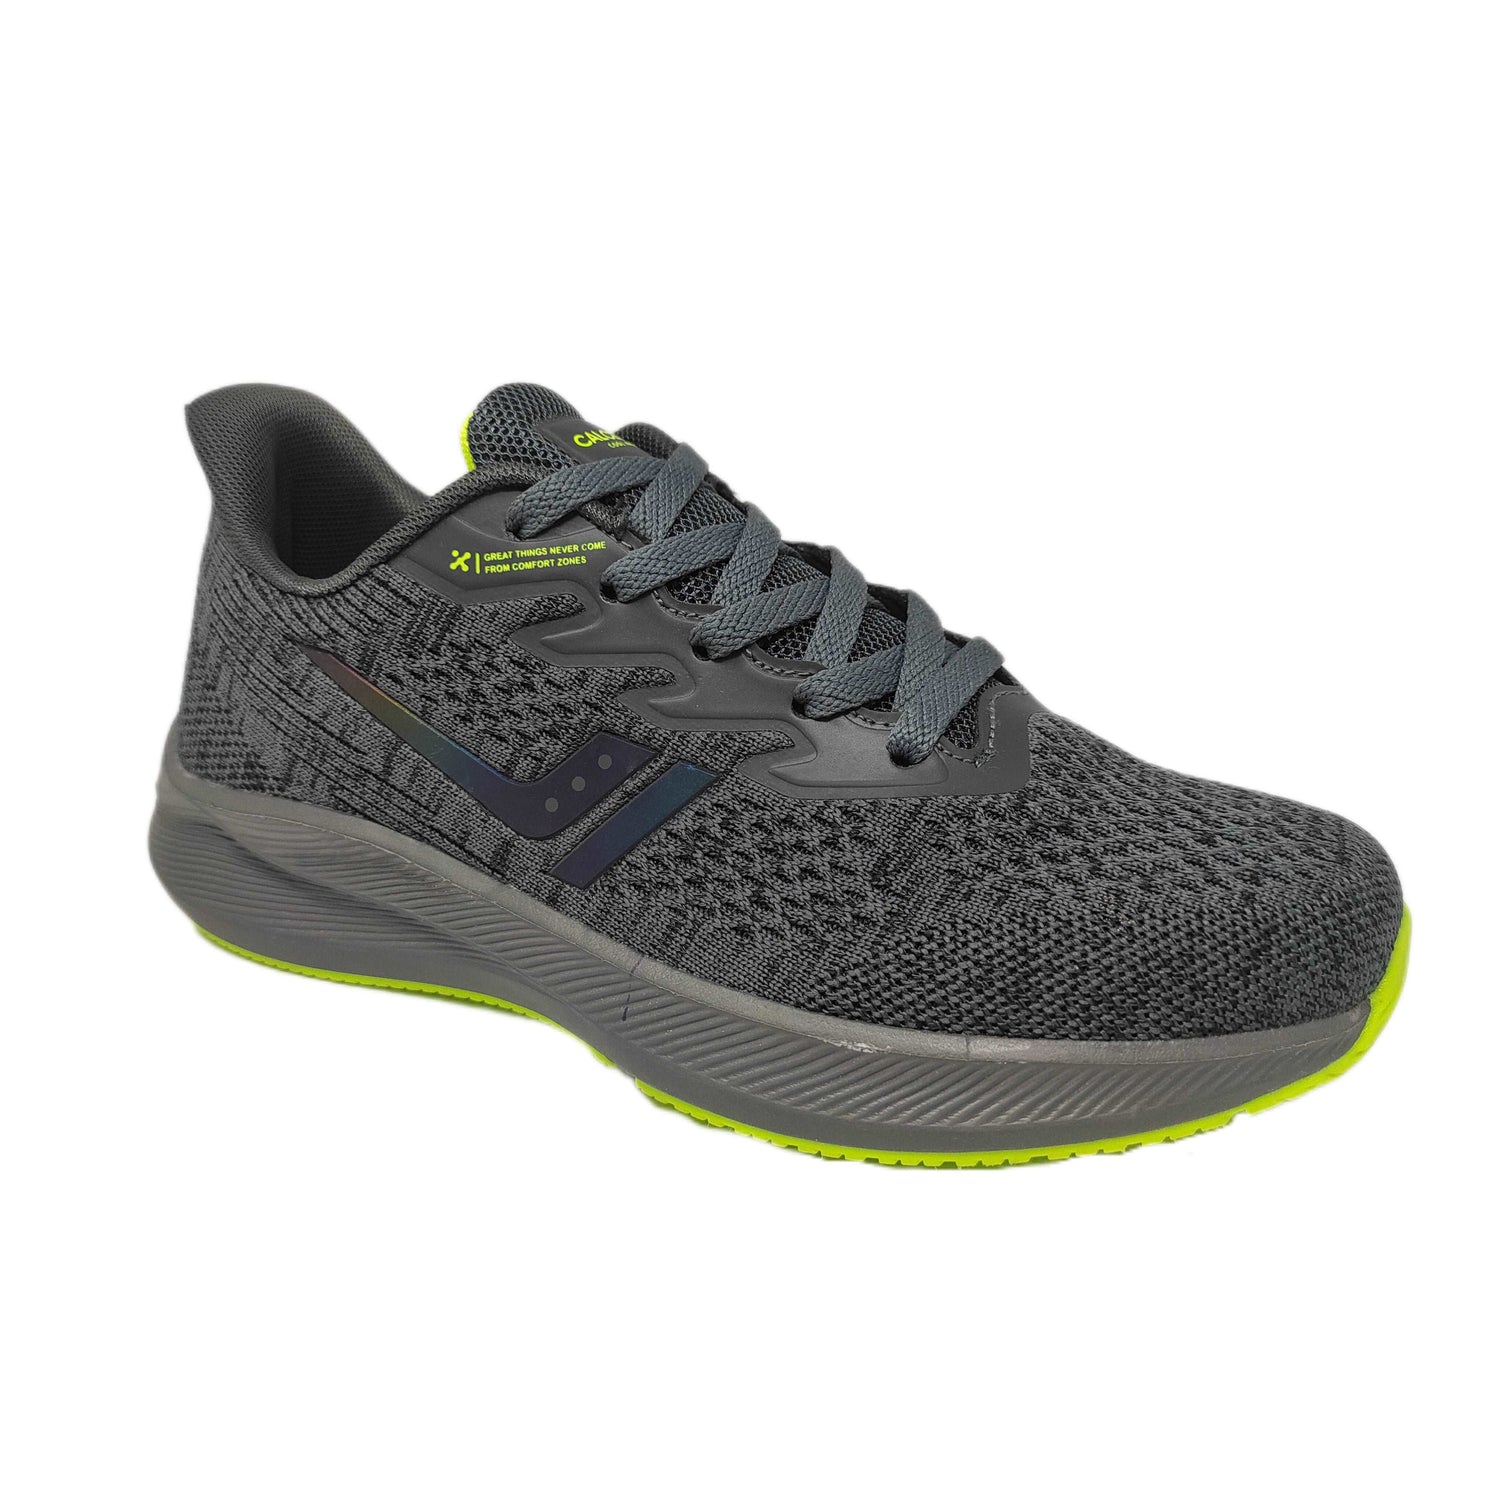 Calcetto CLT-0964 D Grey Lime Running Sports Shoe For Men